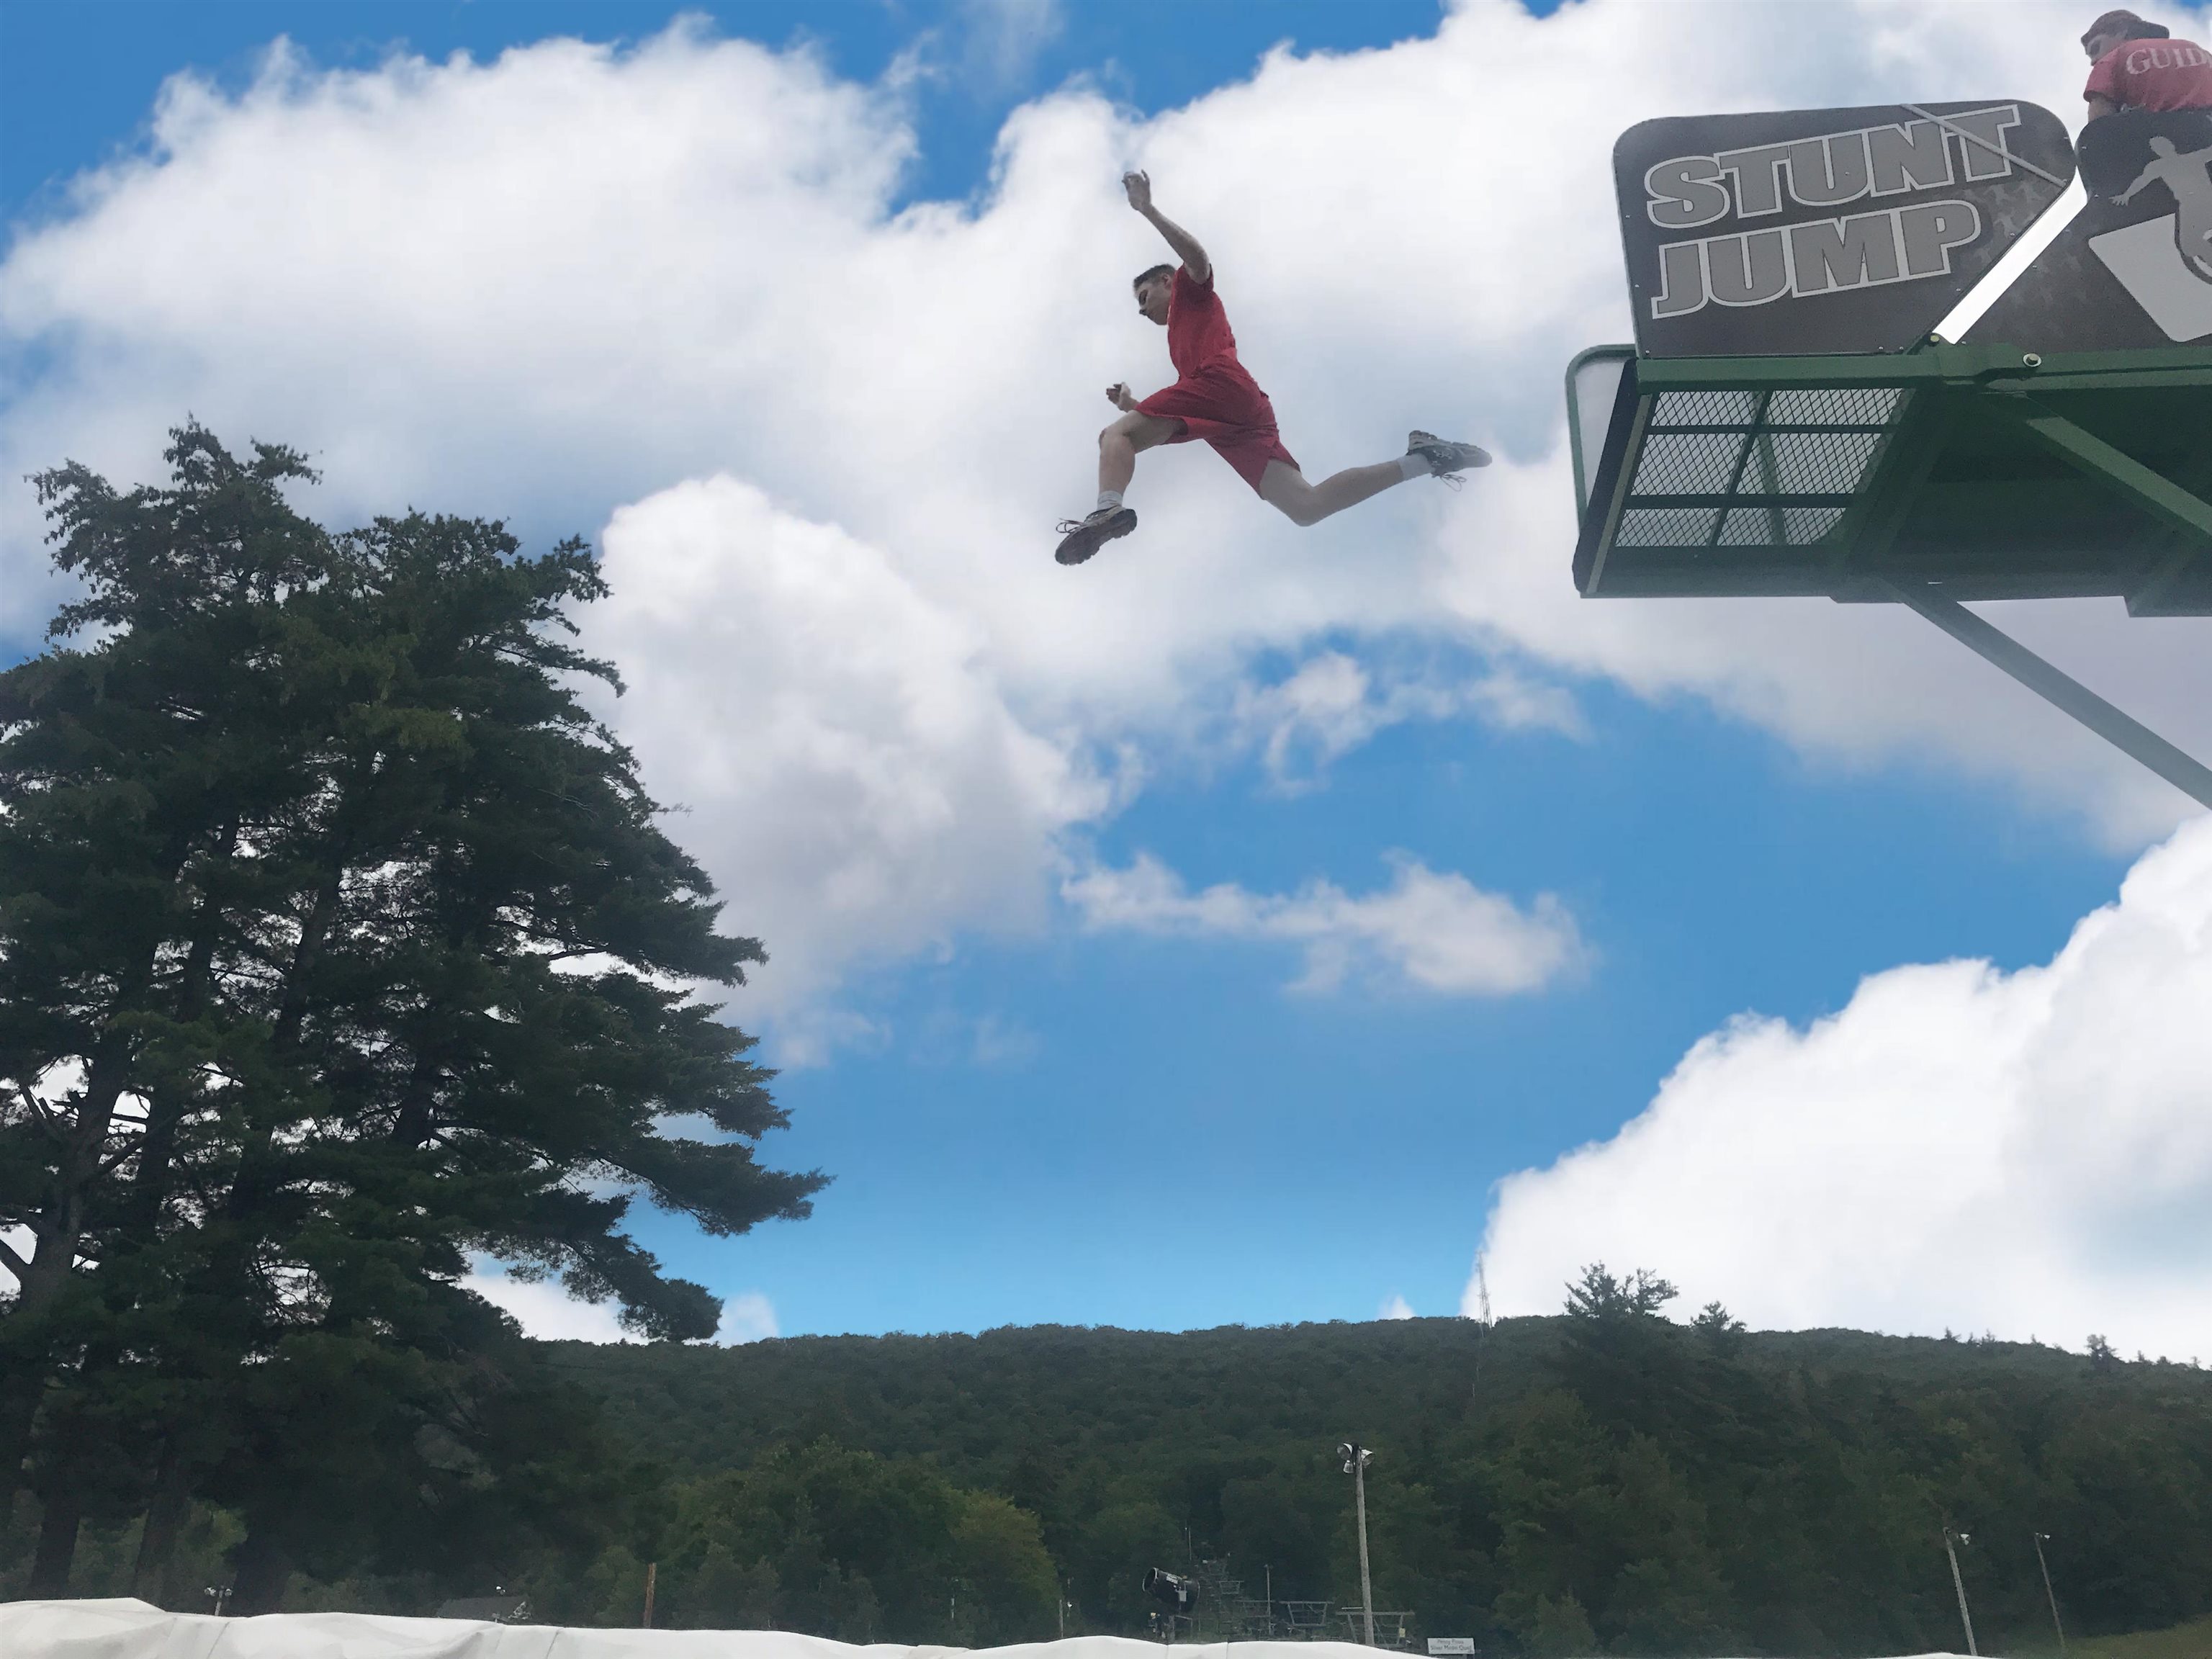 Gunstock Ski Resort offers alpine and nordic skiing, tubing and horse drawn carriage rides in winter.  Picturesque cafes and night skiing are idyllic, especially when you has new snow falling.  For adrenaline in summer, try the 1.6 mile long zip line.